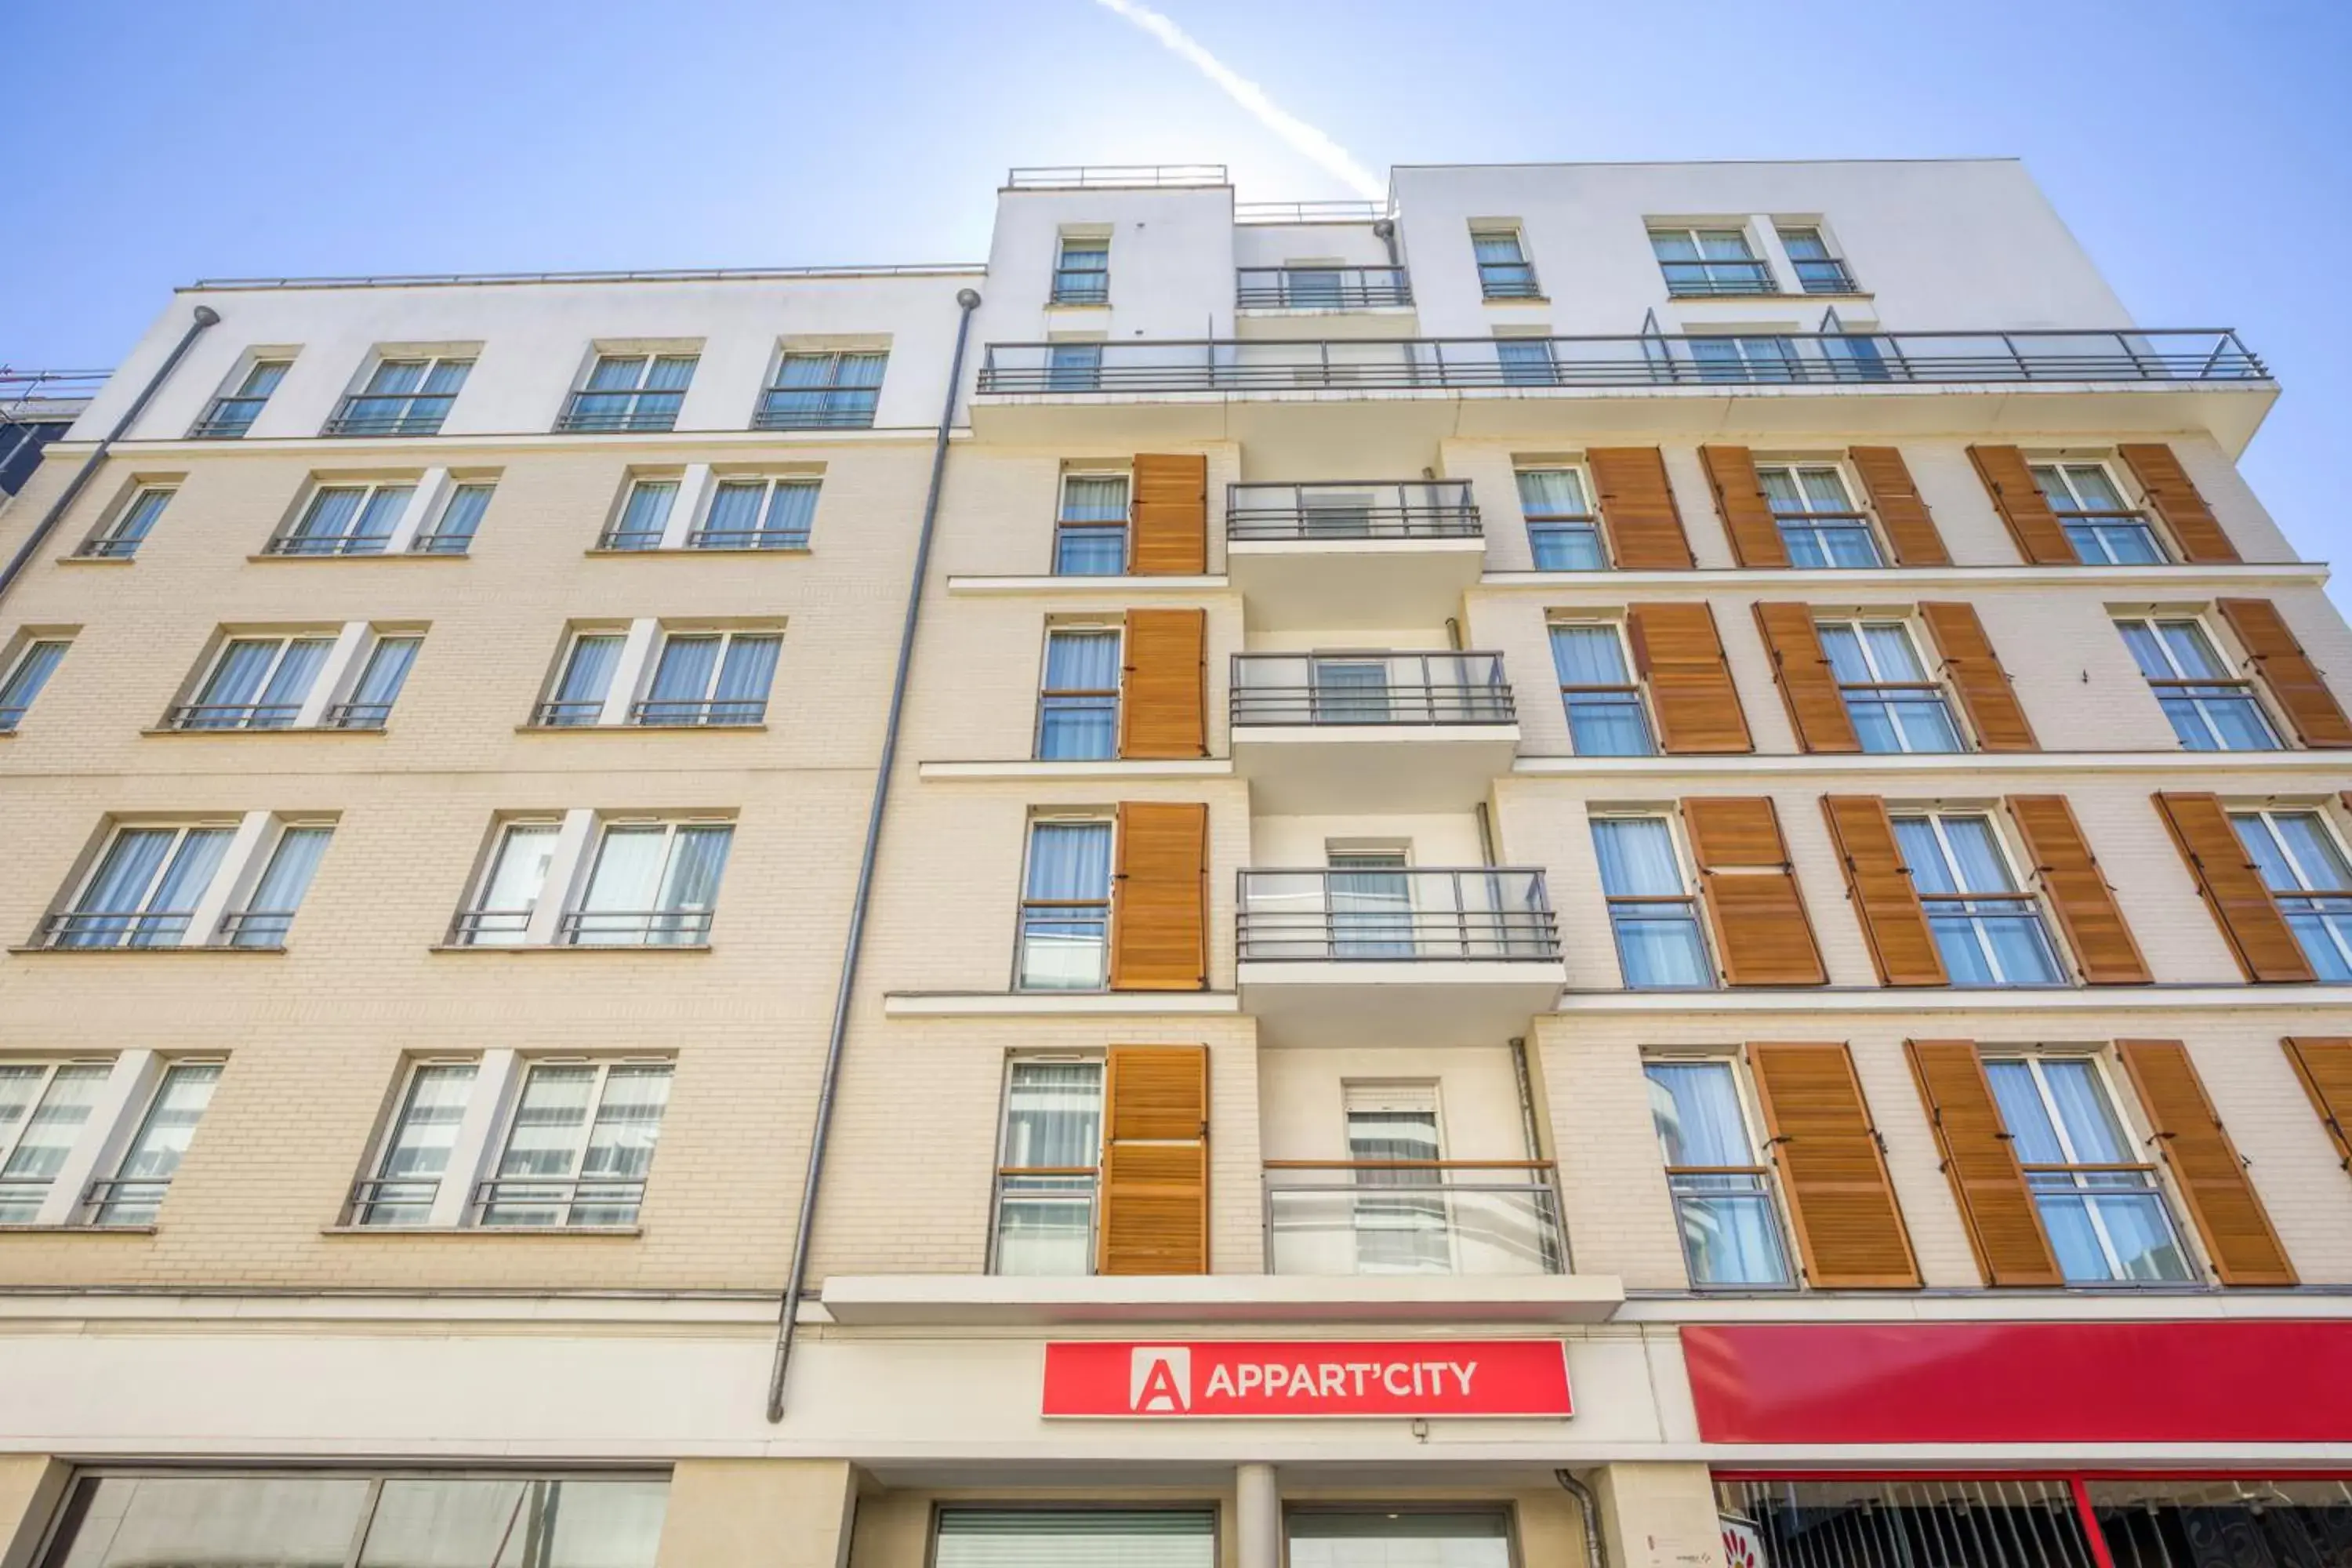 Property Building in Appart'City Paris Clichy-Mairie